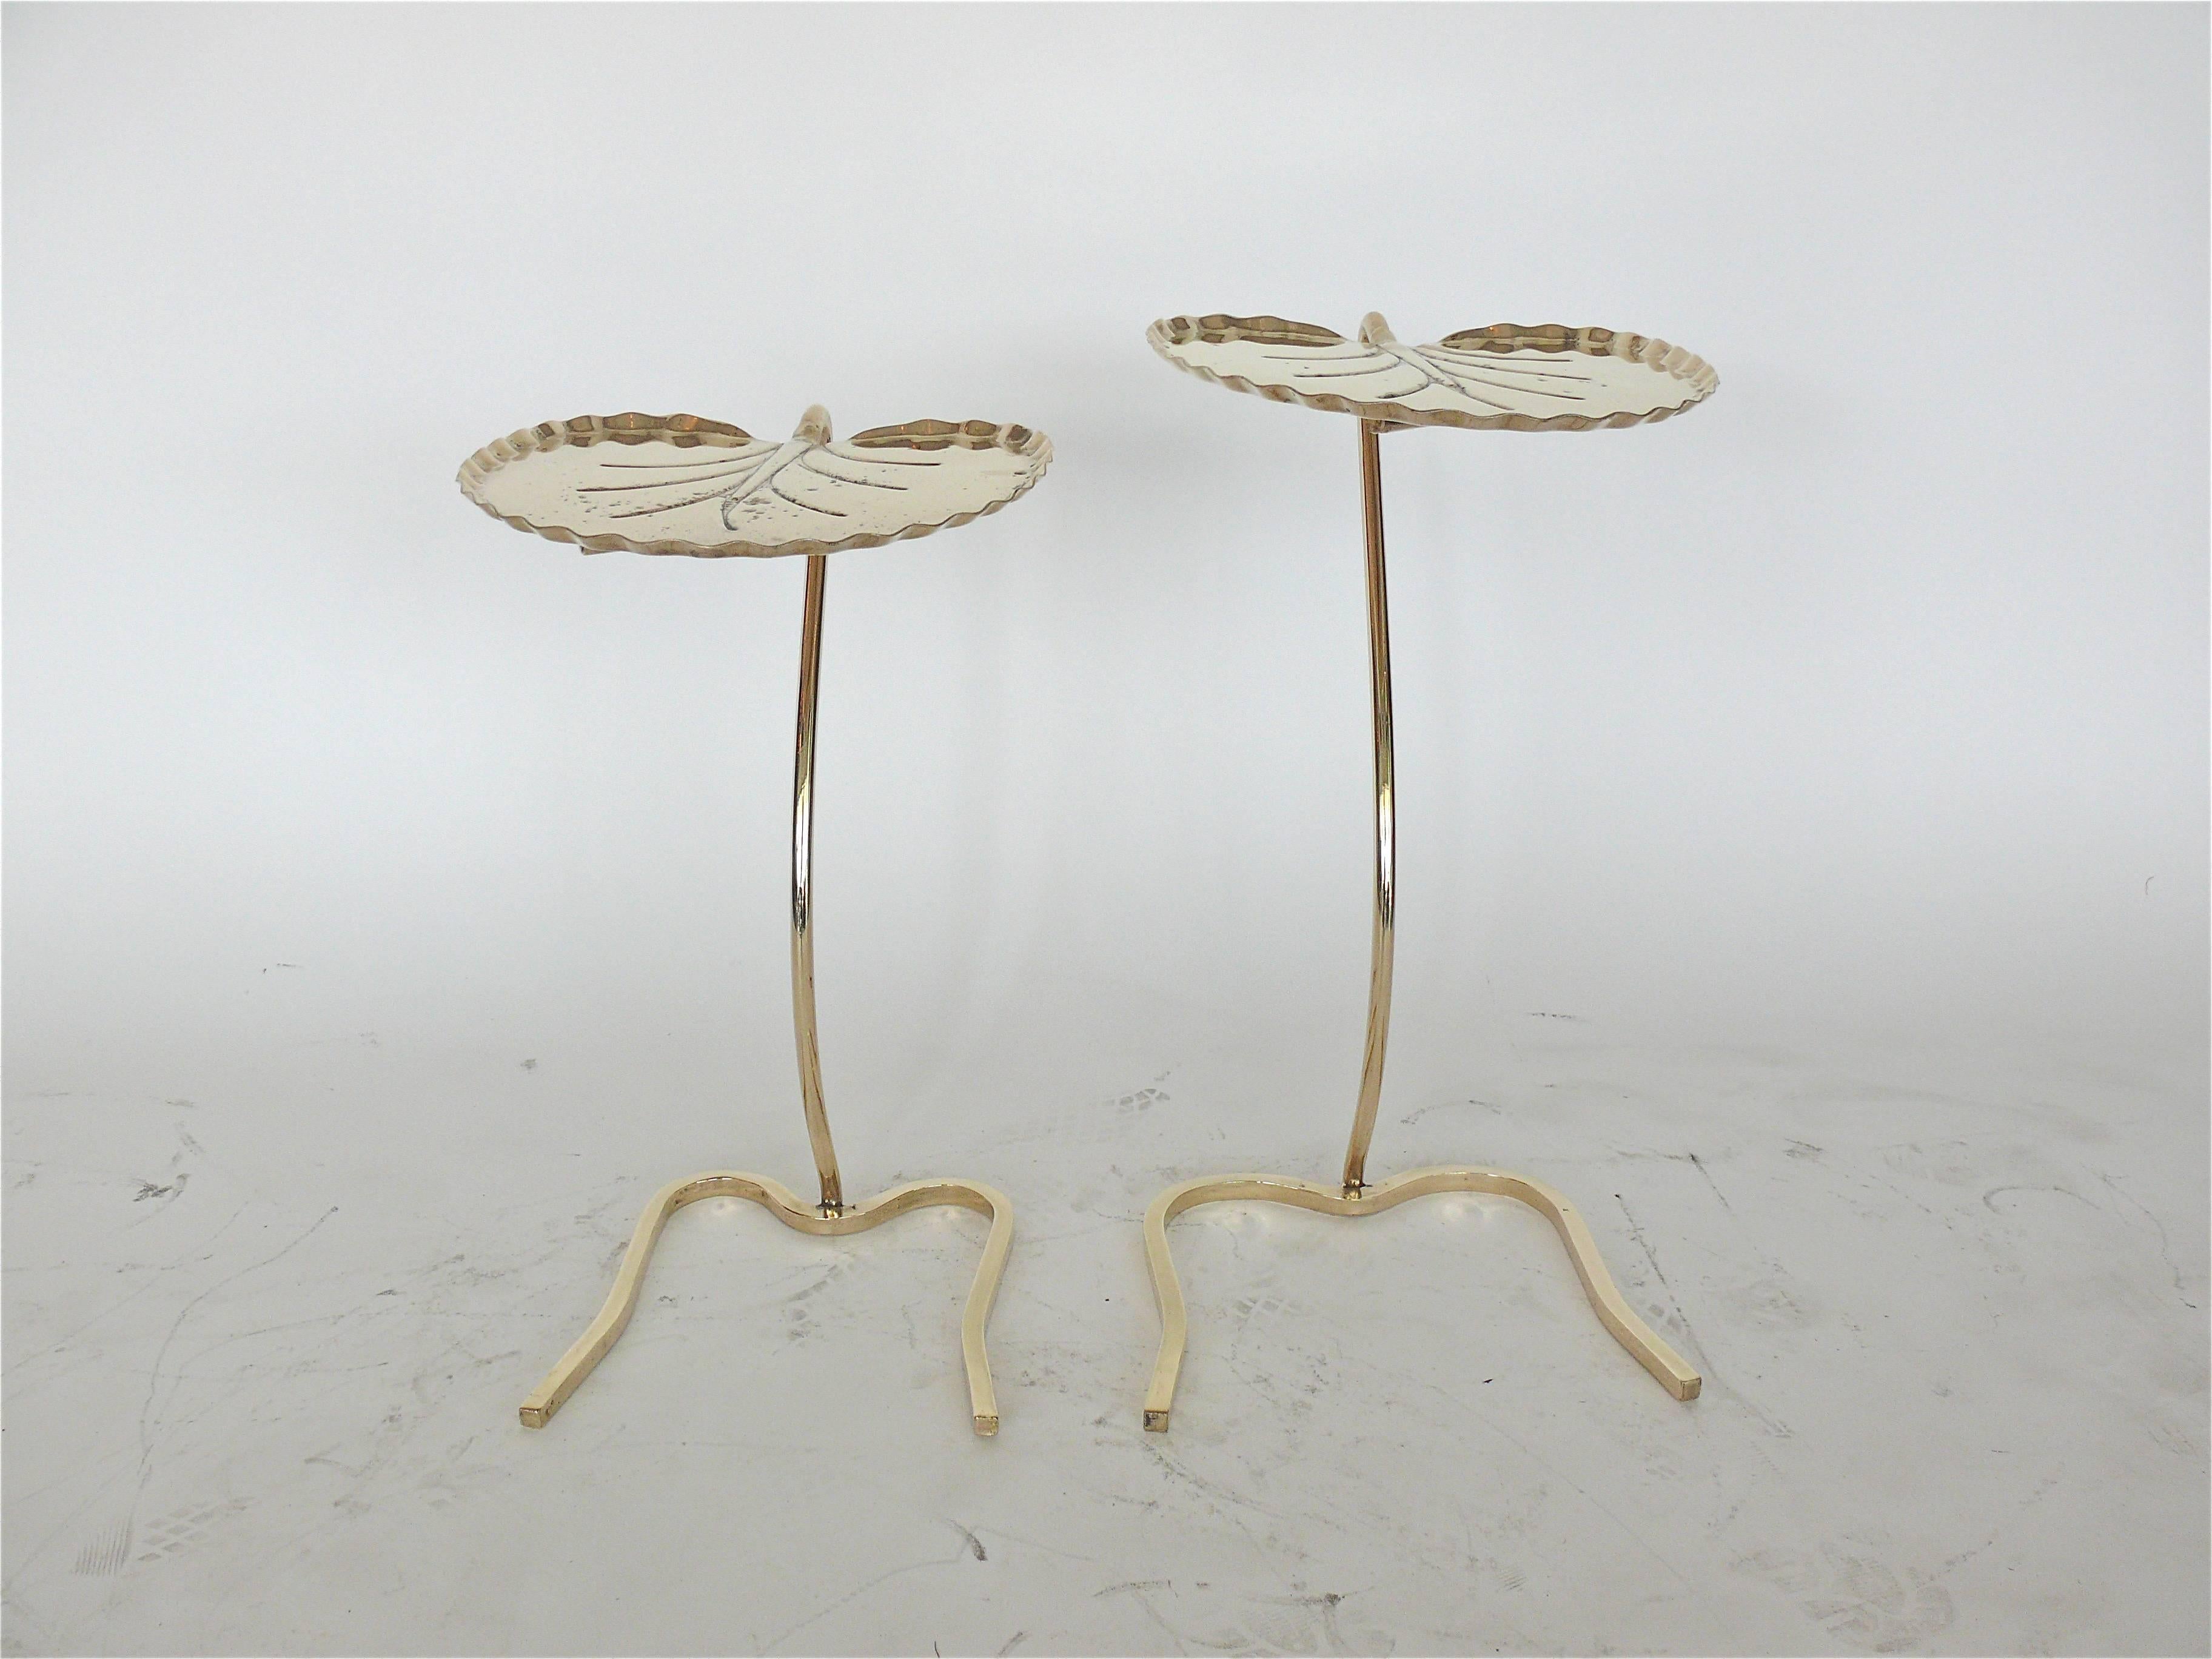 Pair of metal lily pad nesting tables designed by John Salterini. One is larger that the other and they nest together. This set has been newly plated in a stunning polished brass. Nice set suitable for indoor or outdoor use.
Dimensions in listing